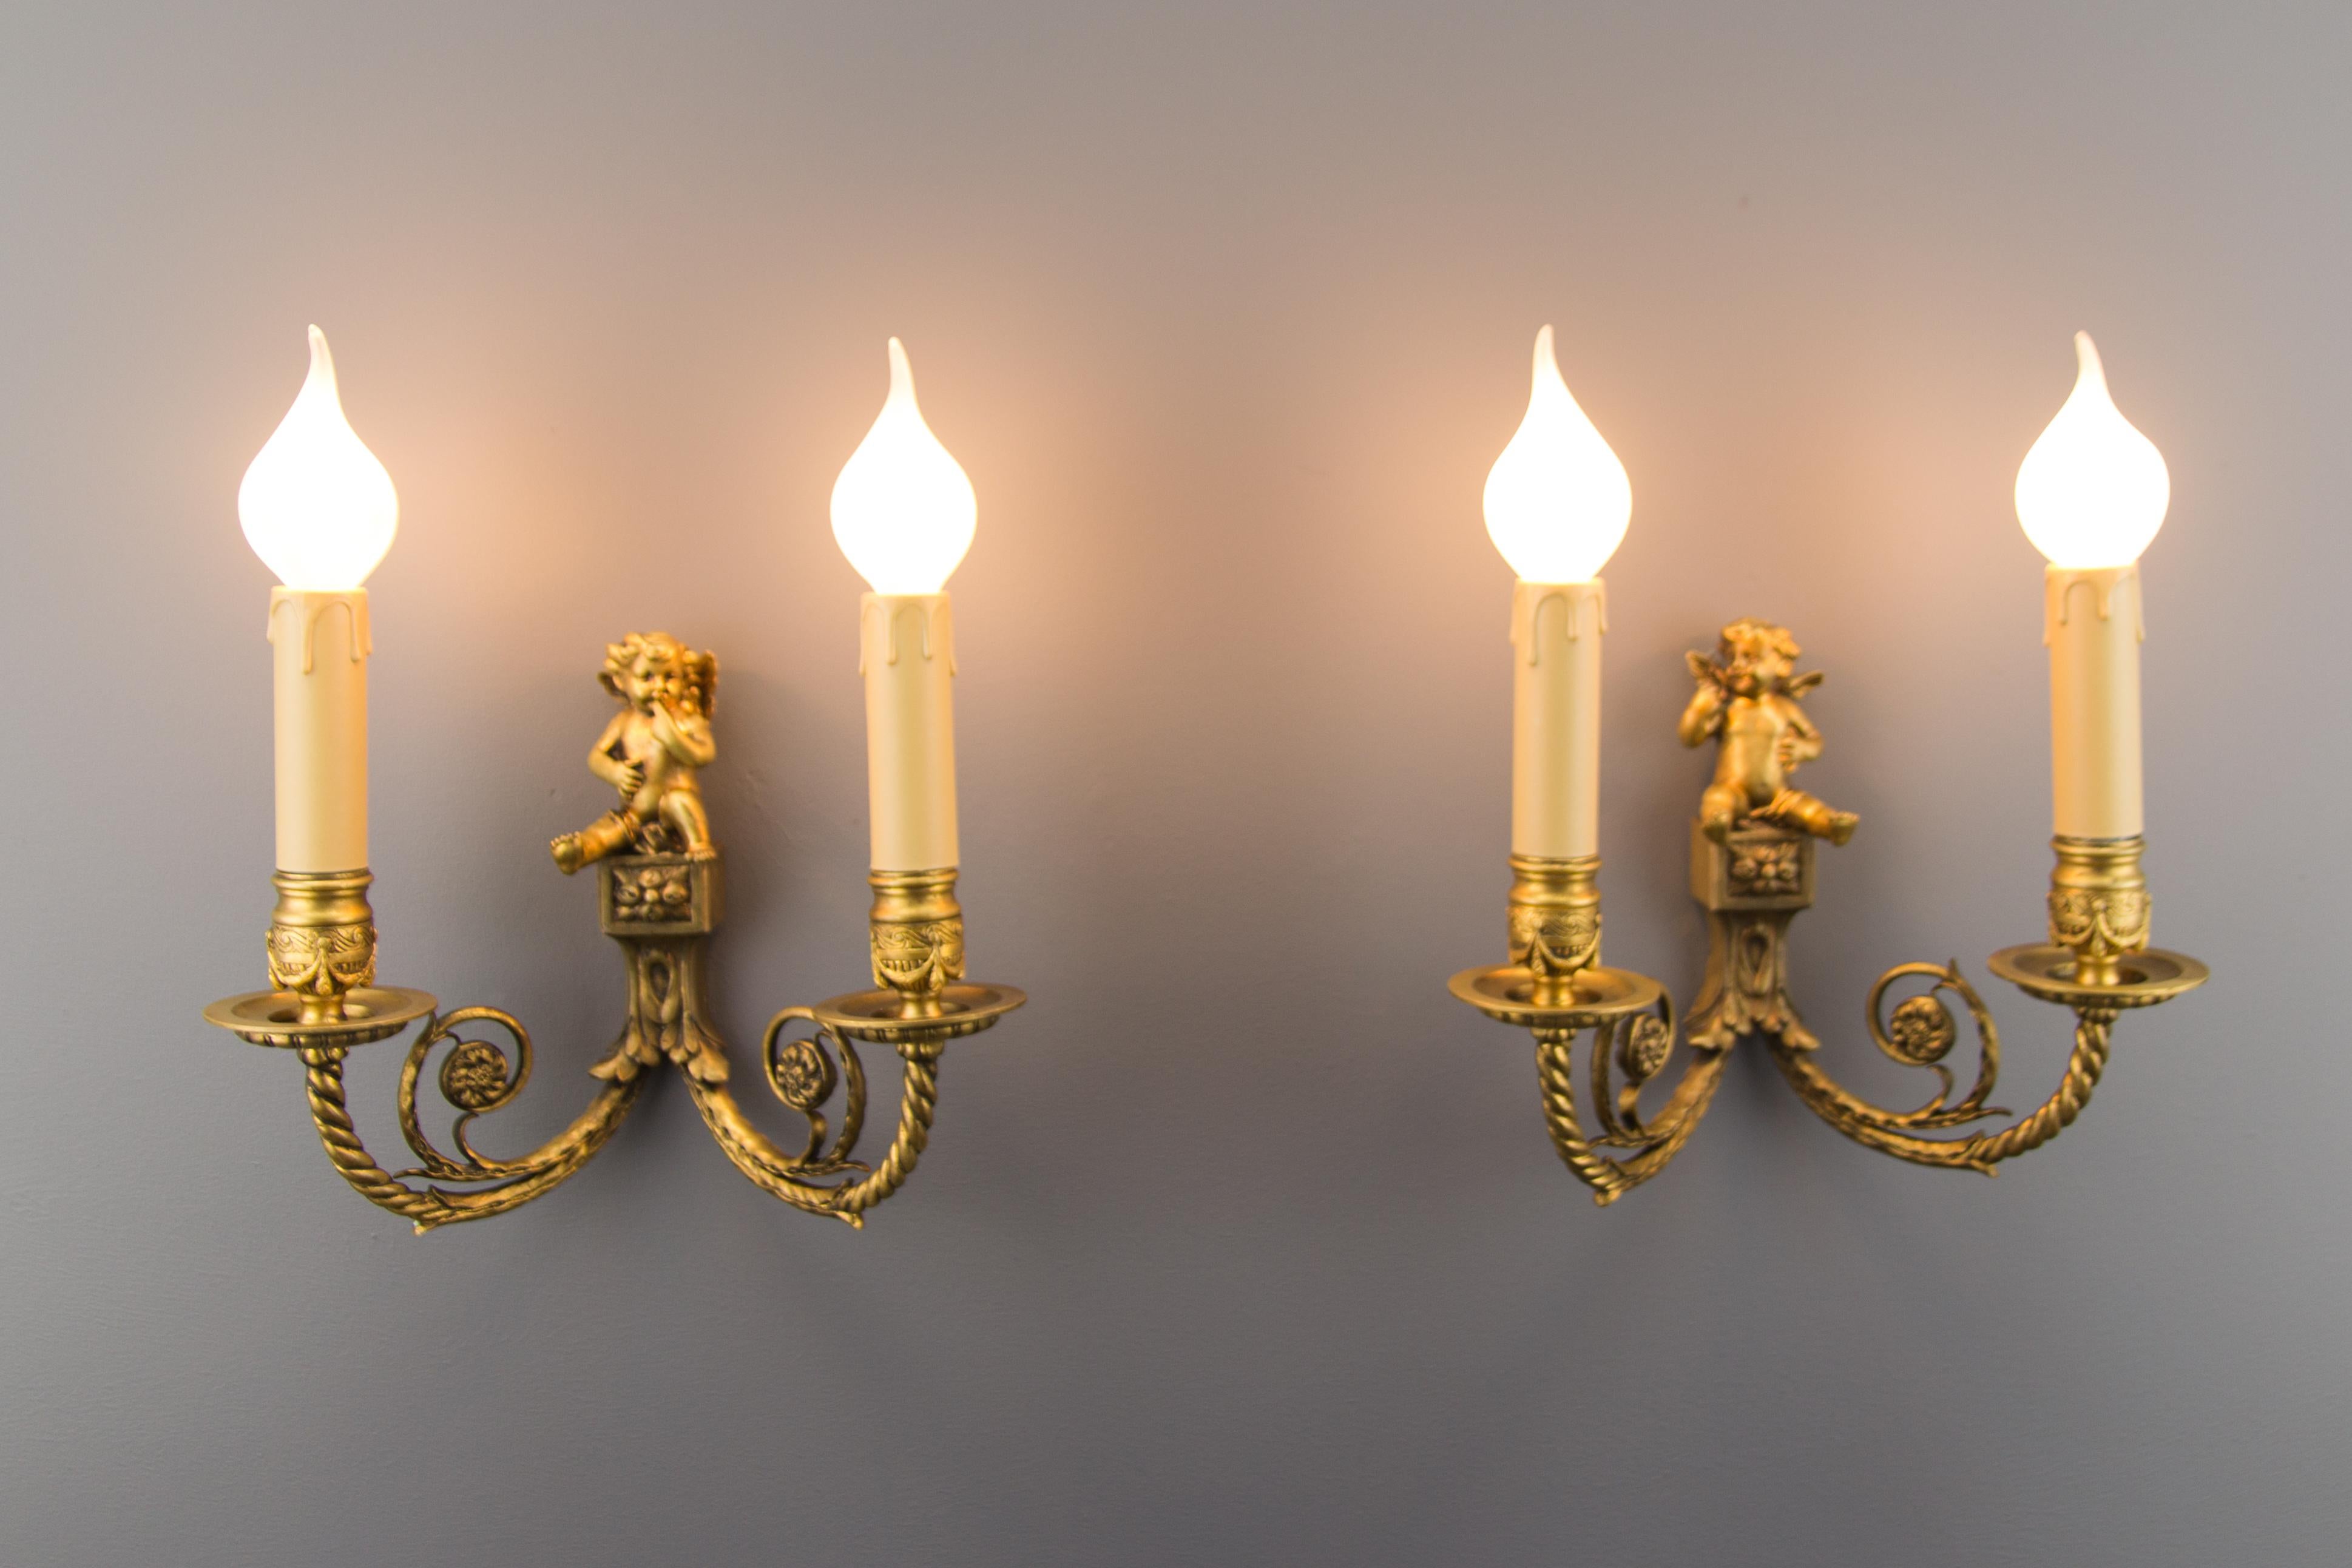 Lovely pair of late 19th century Louis XVI style French bronze cherub wall lights. These wall lights are electrified and each decorated with adorable winged cherub. Each sconce has two arms in the shape of ropes decorated with an interior ‘C’ scroll